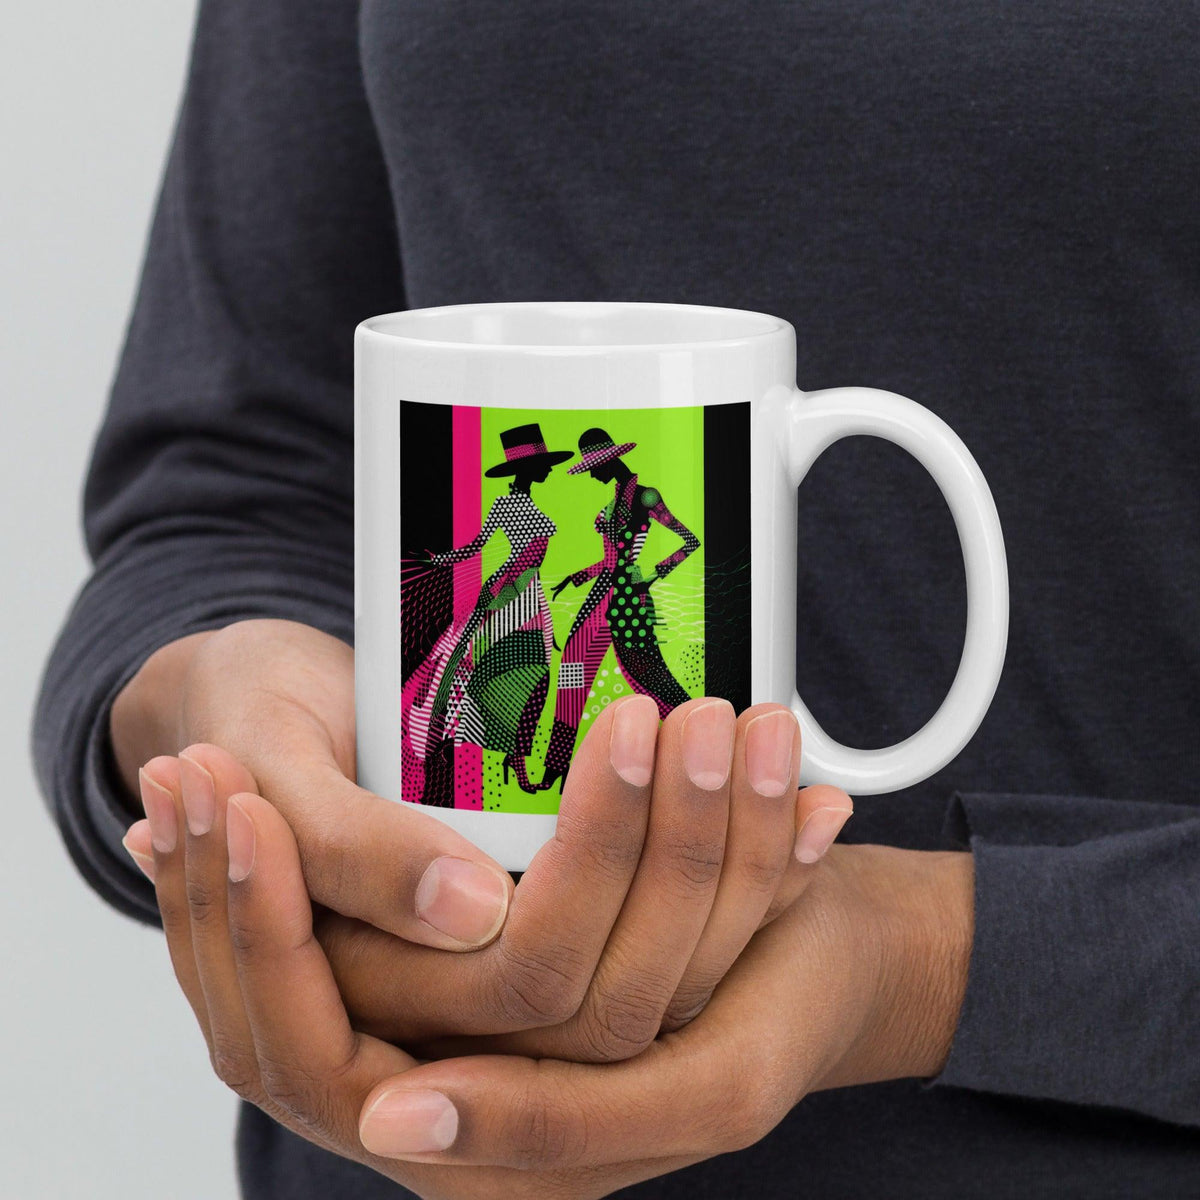 Balletic fashion portrait on a glossy white mug, perfect for art lovers.